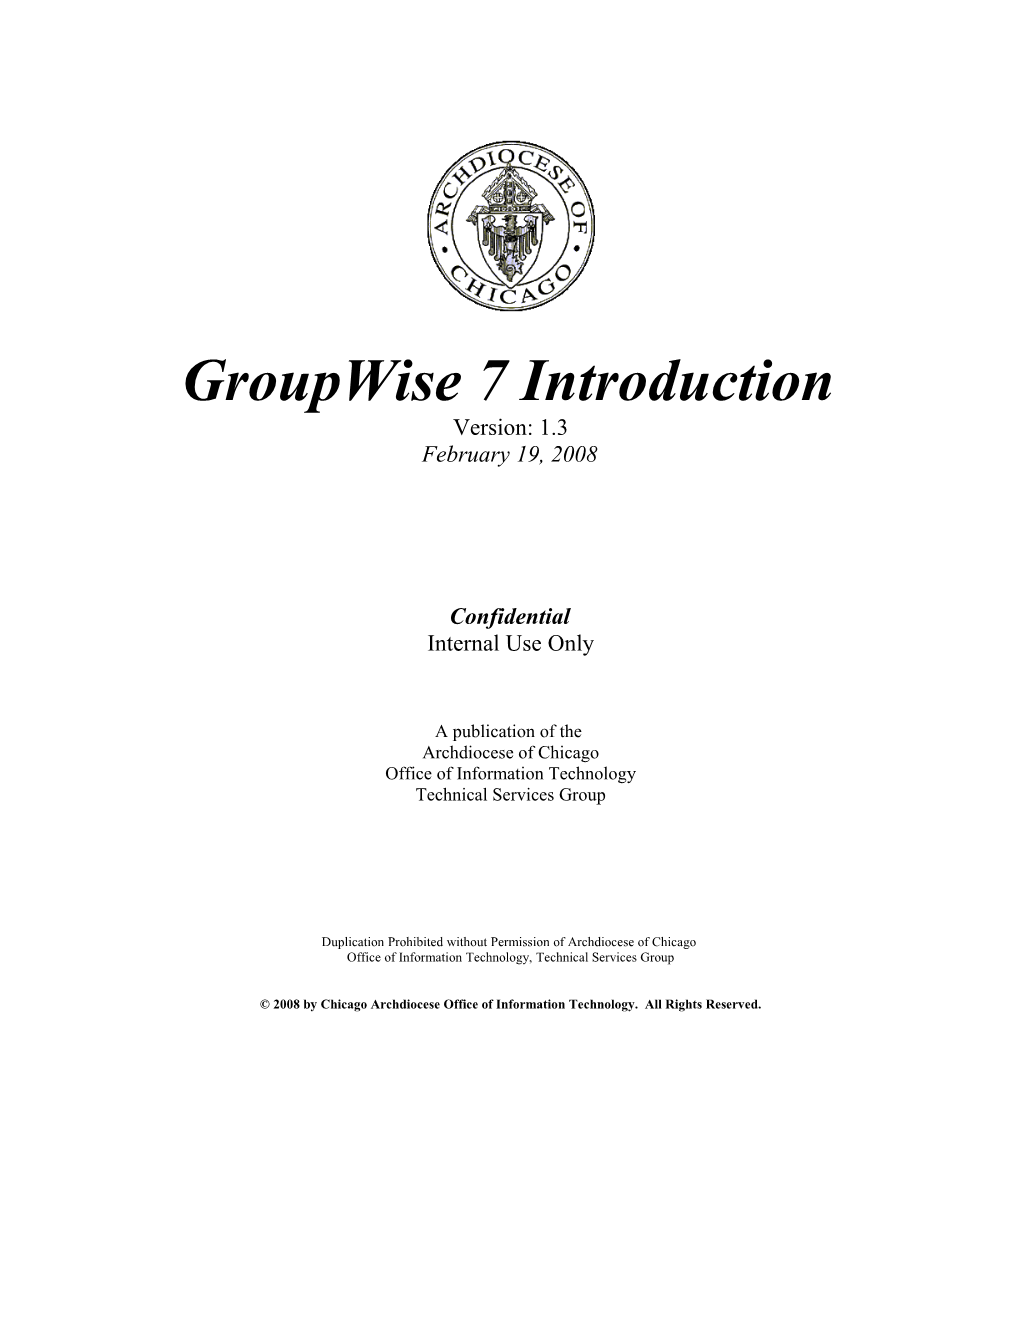 Groupwise 7 Introduction